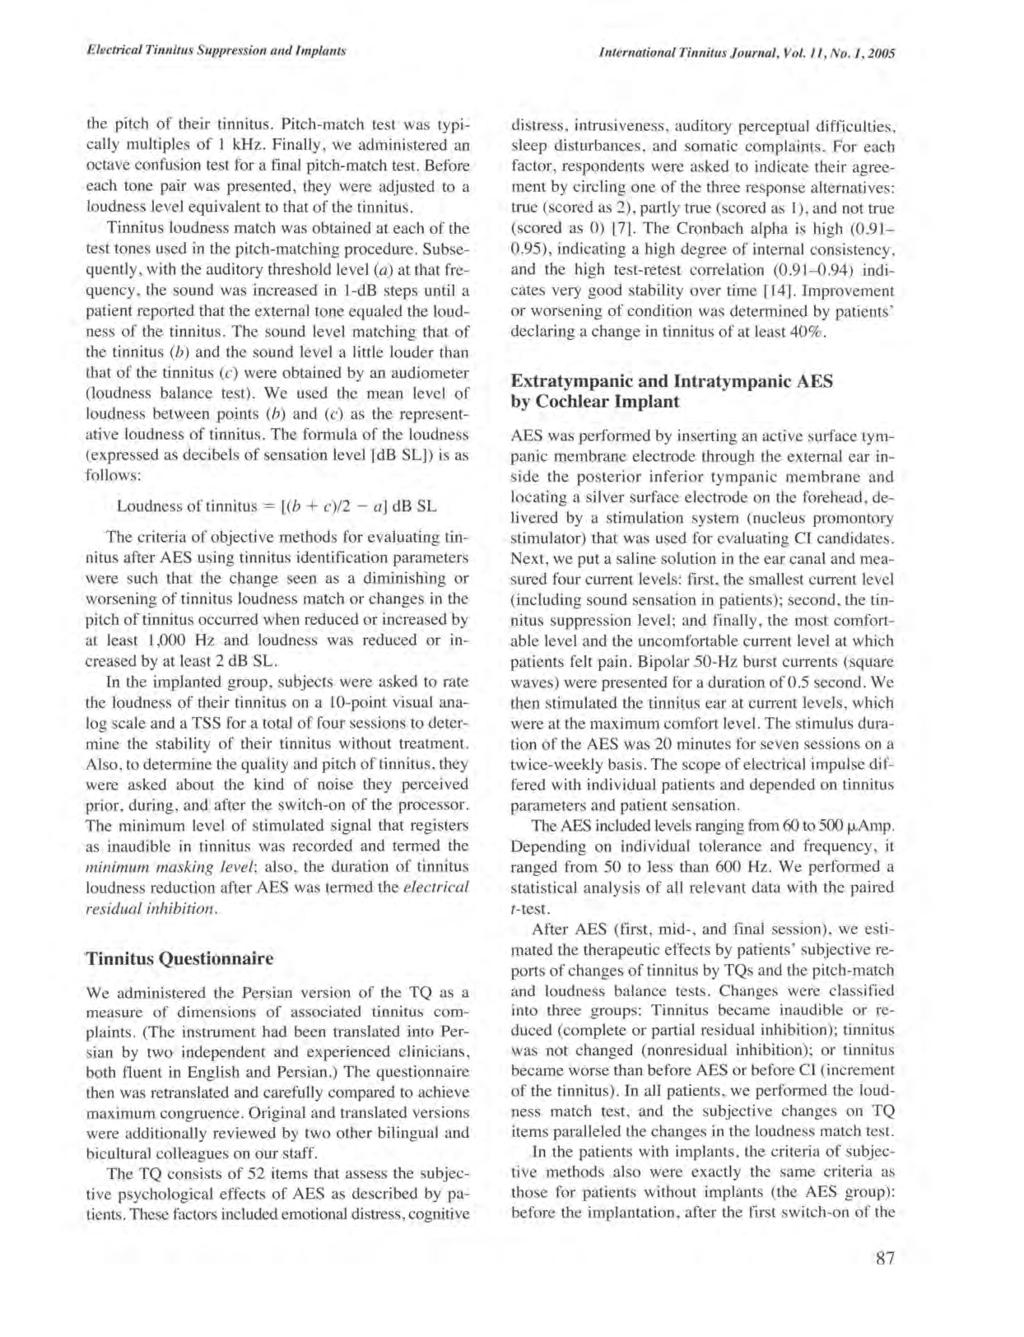 Electrical Tinnitus Suppression and Implants International Tinnitus Journal, Vol.ll, No.1, 2005 the pitch of their tinnitus. Pitch-match test was typically multiples of I khz.